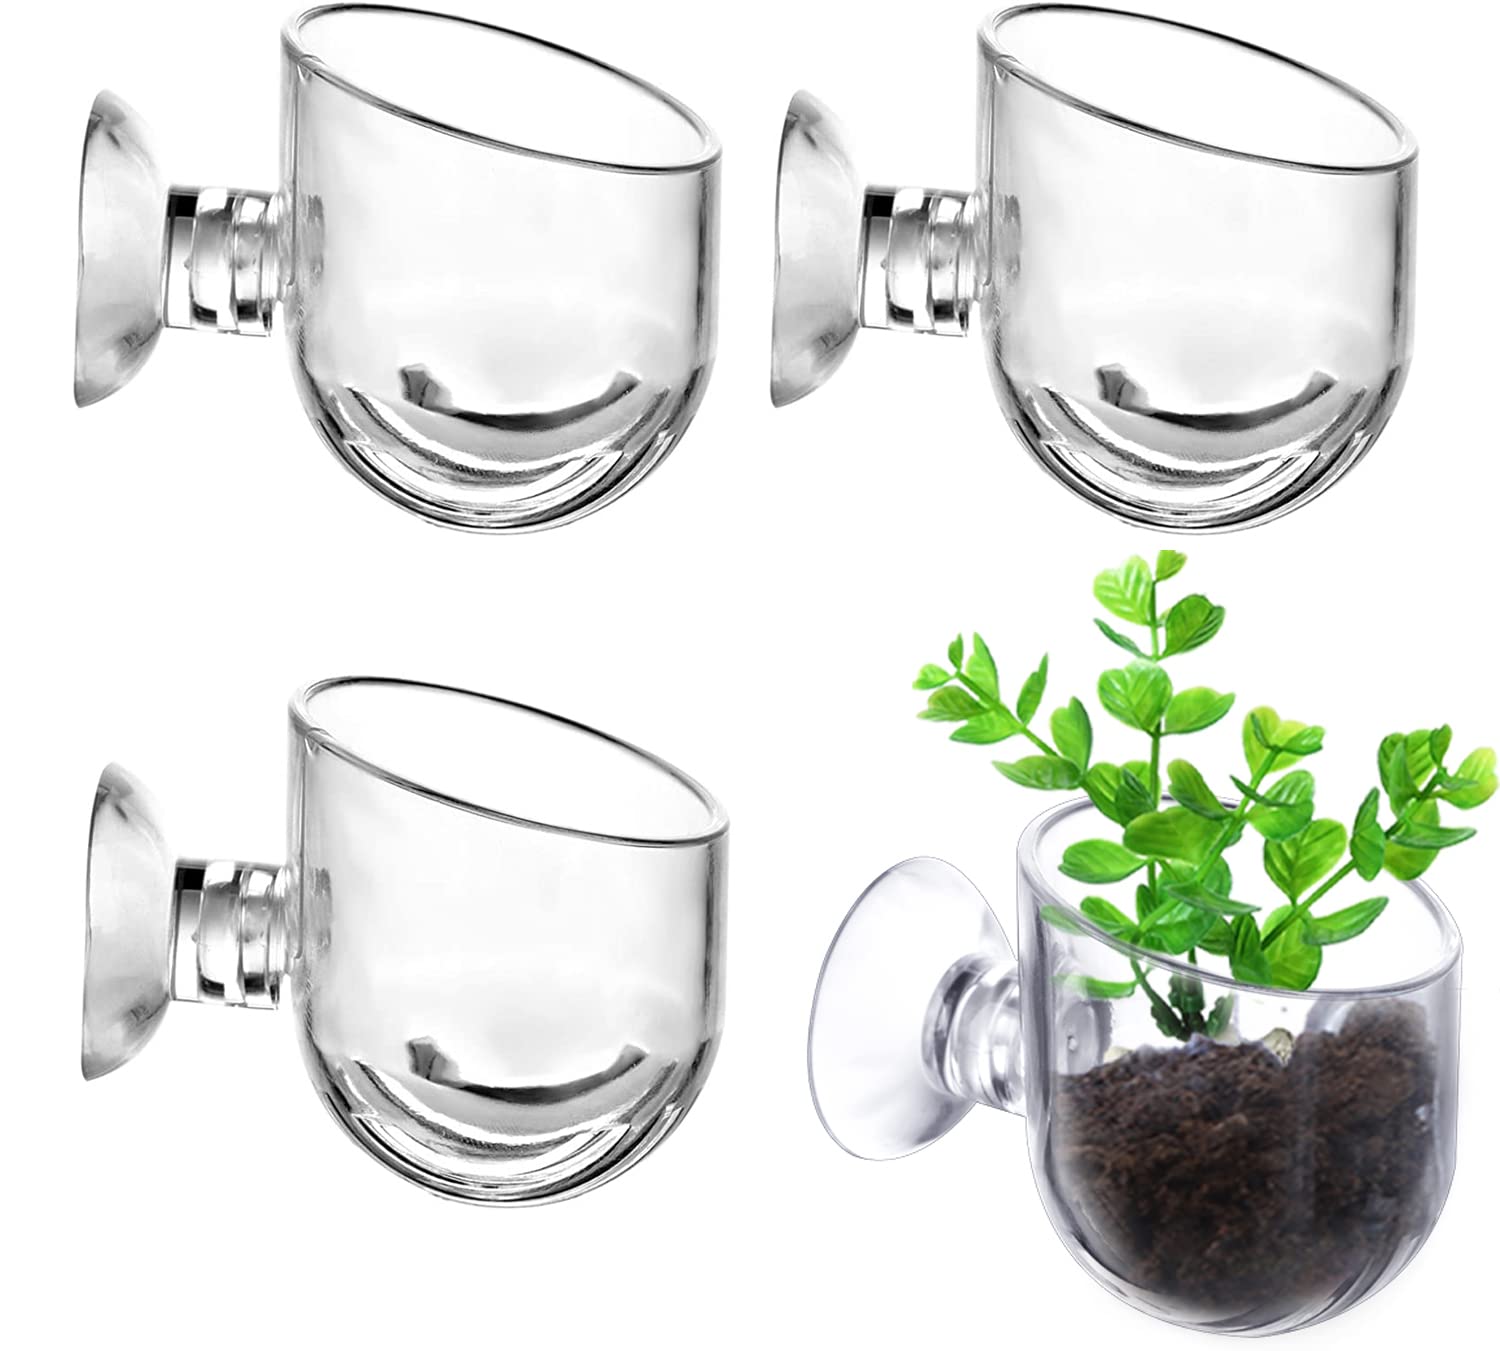 How to Secure Aquarium Plants with Suction Cups? 2